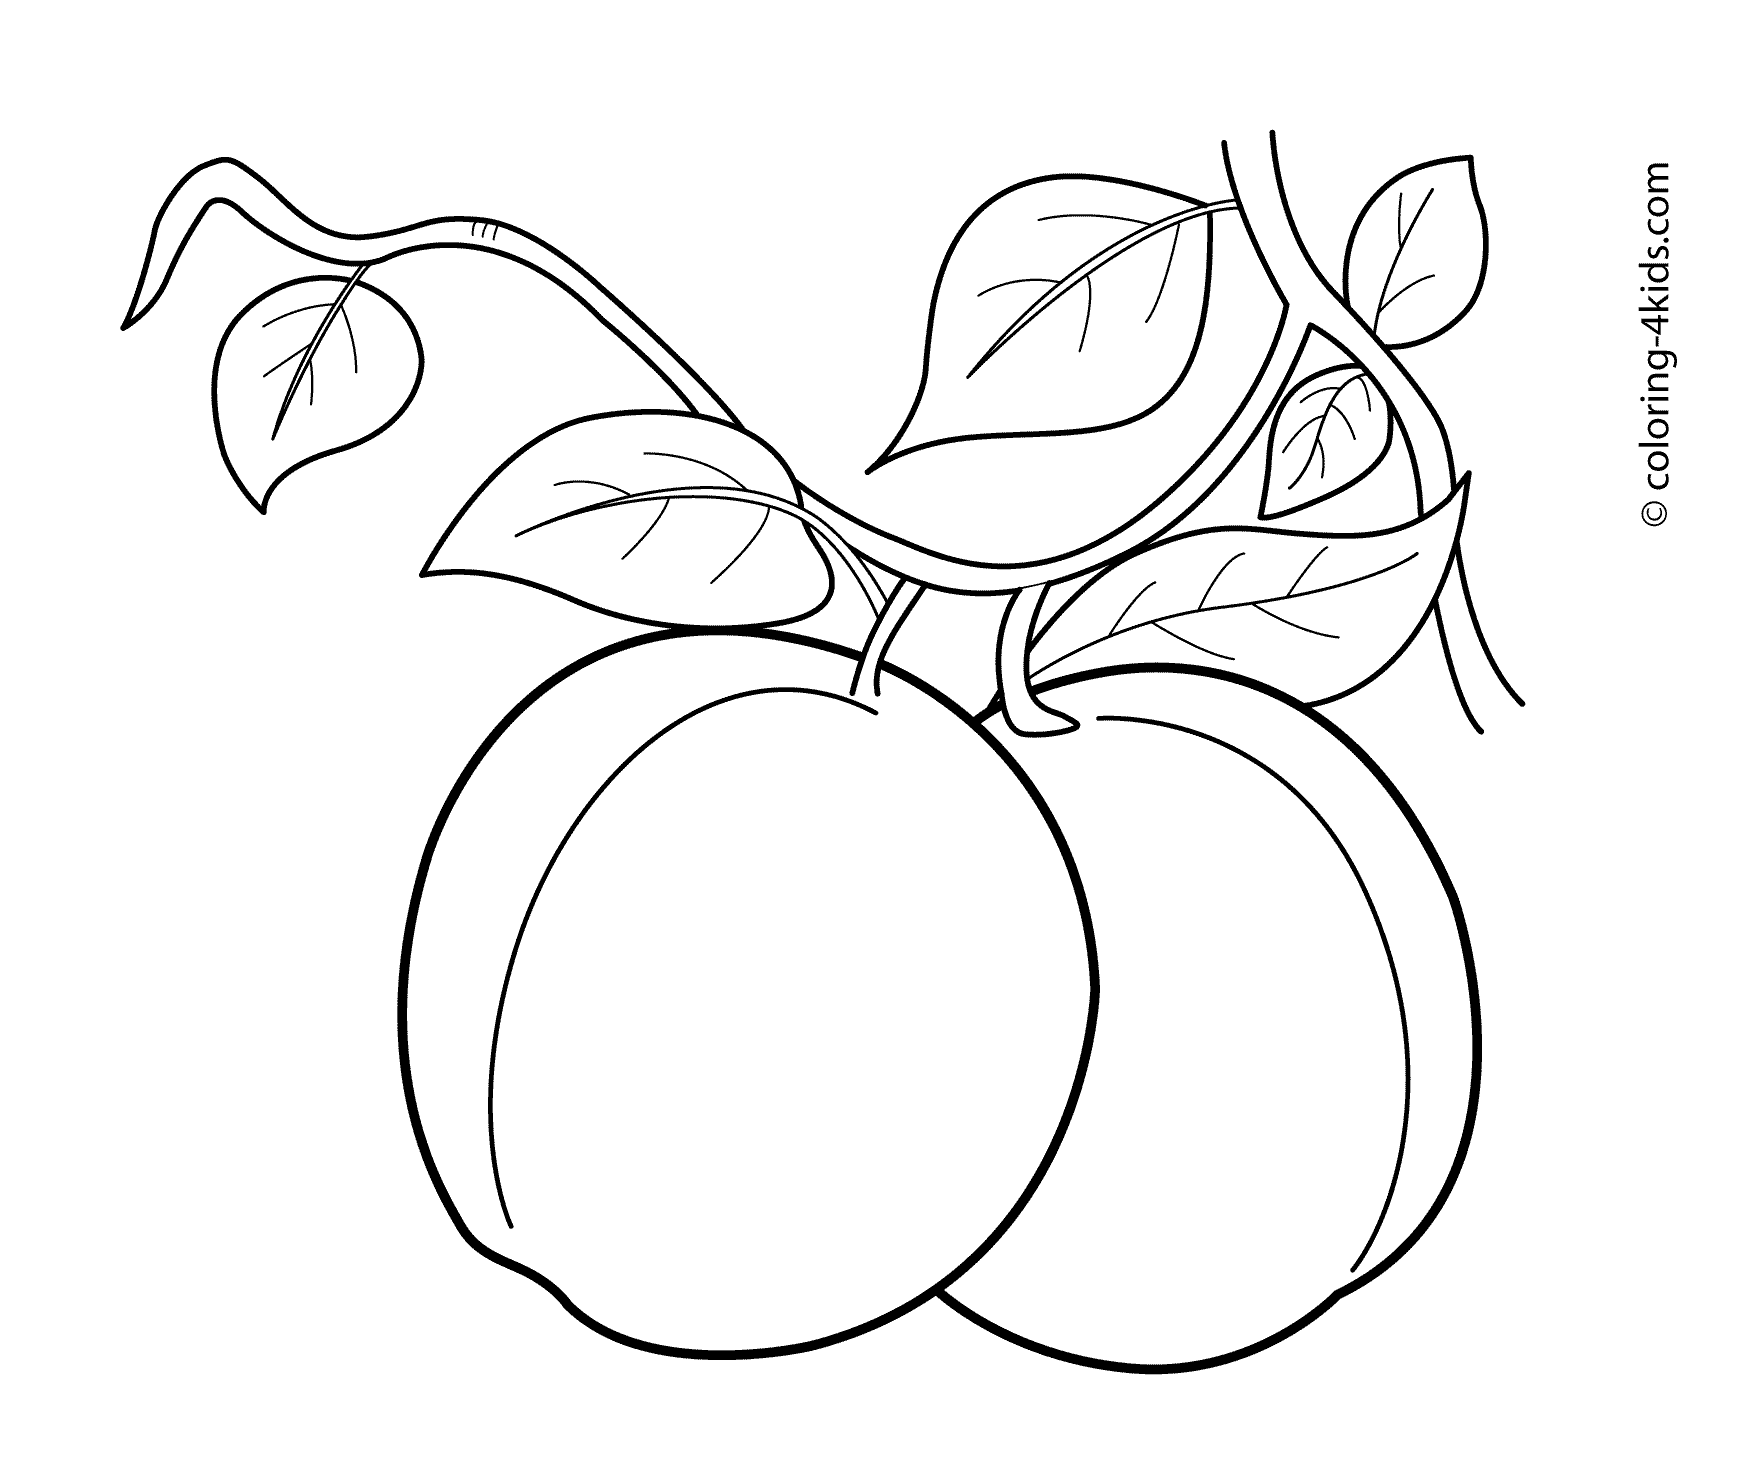 Apricots fruits coloring pages for kids, printable free | Fruit ...